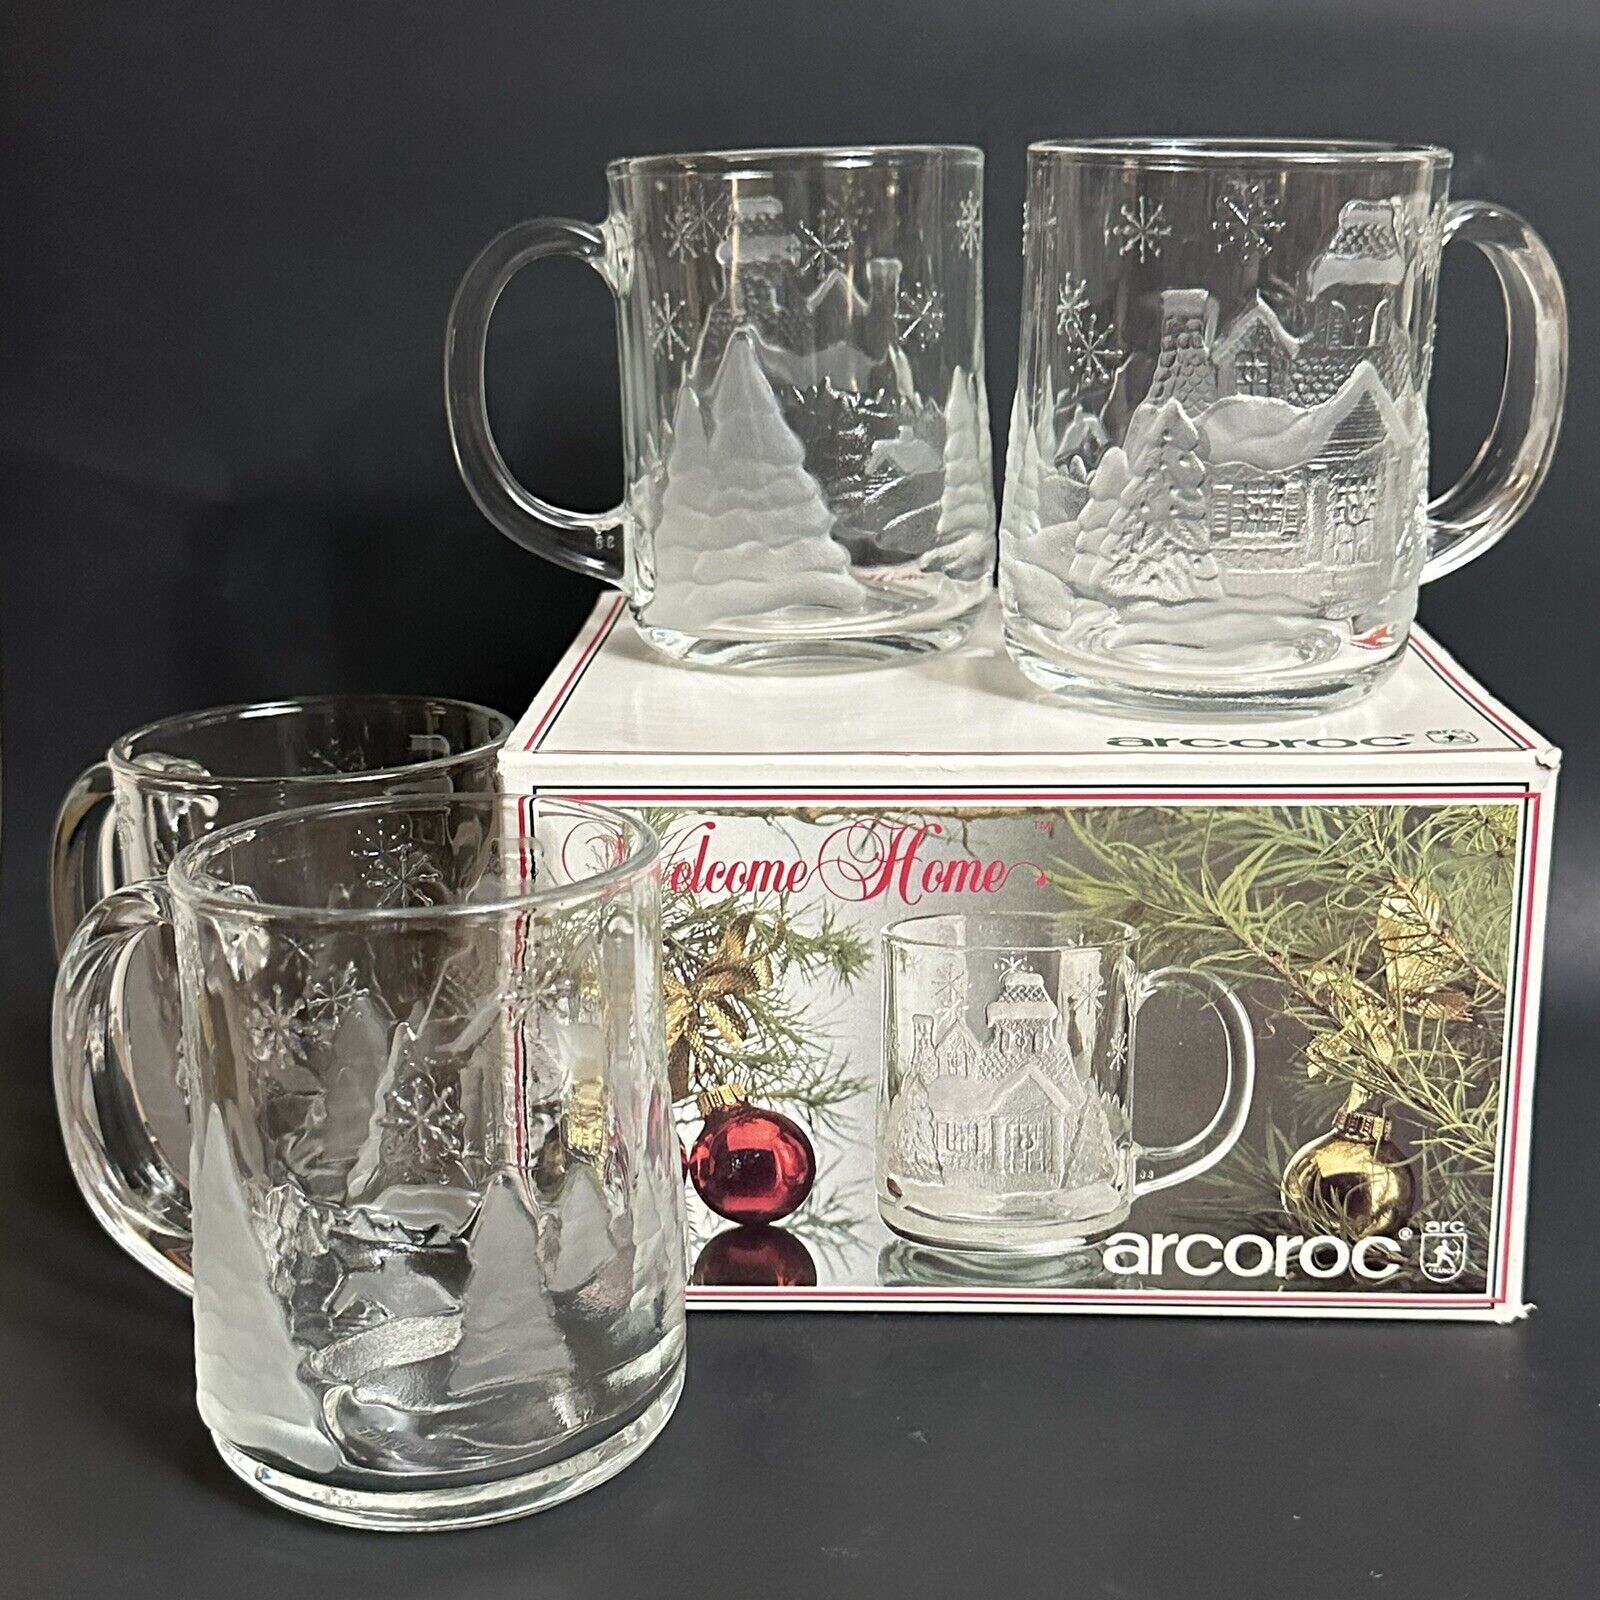 VTG Arcoroc Mugs Holiday Mugs Frosted Embossed Clear Glass Set Of 4 NOS